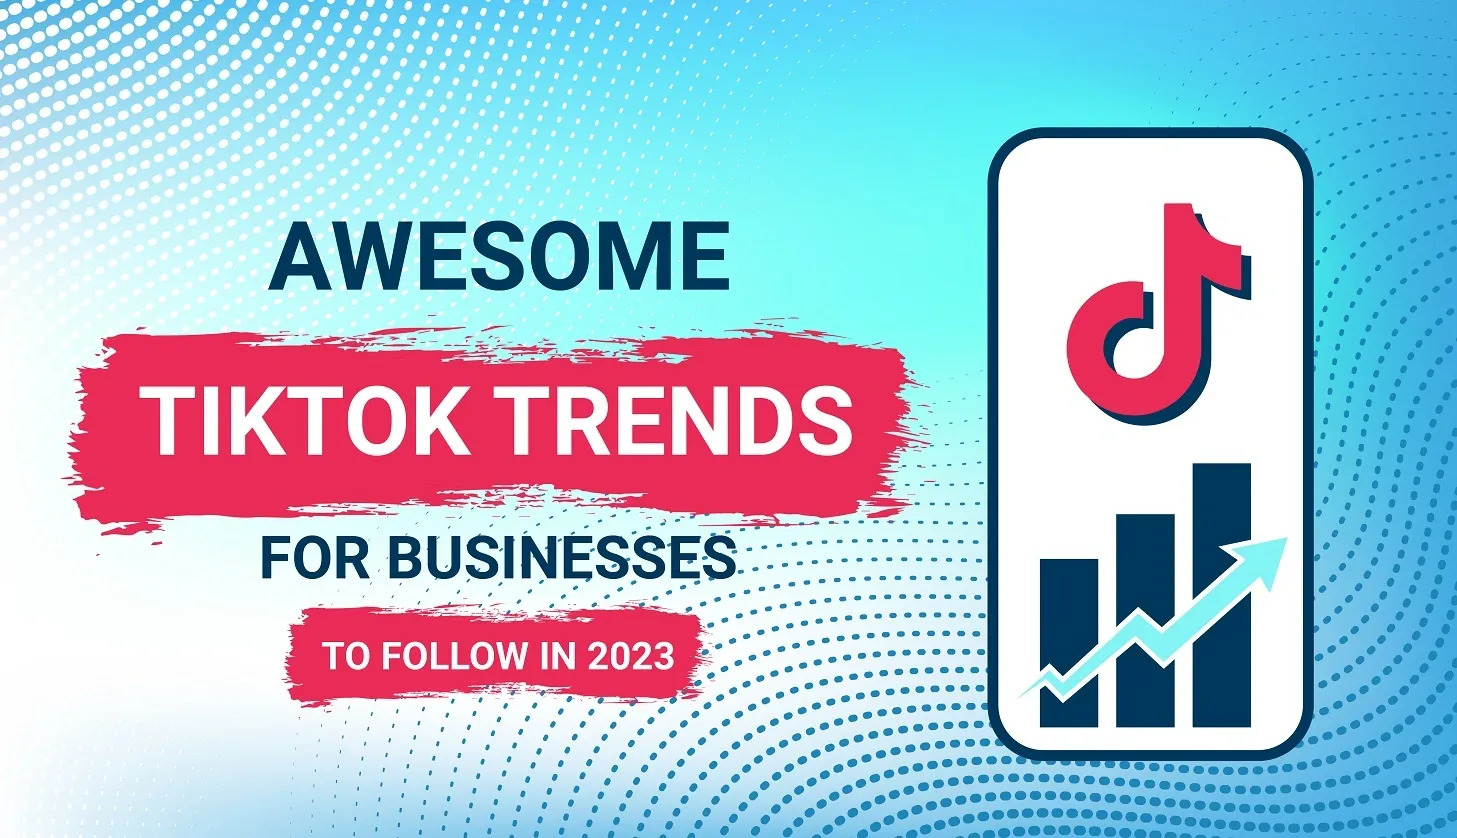 Awesome TikTok trends for businesses to follow in 2023